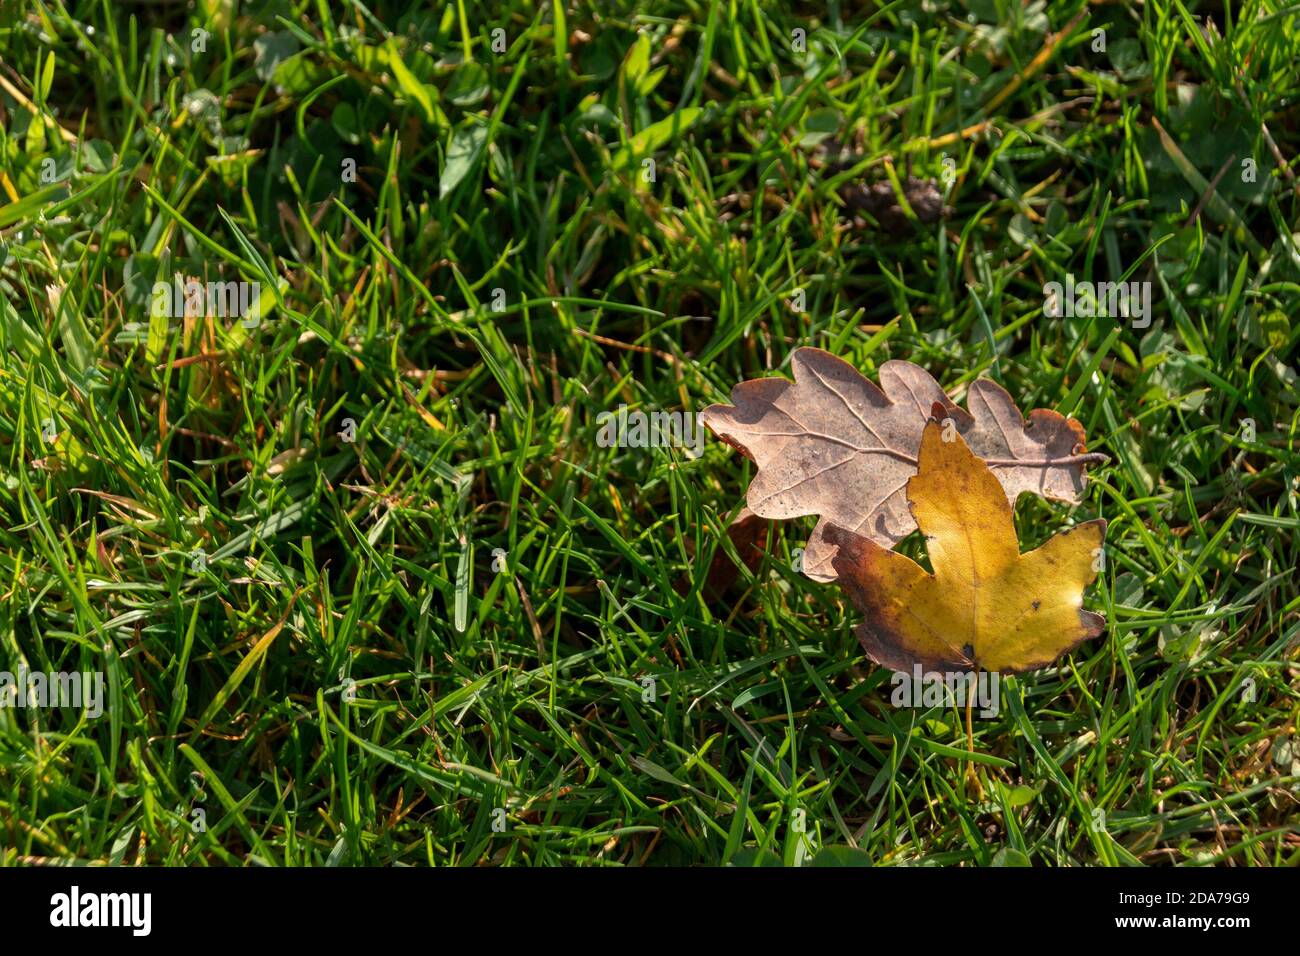 a close up view of two autunm leaves that has fallen onto the lush green grass in a park Stock Photo